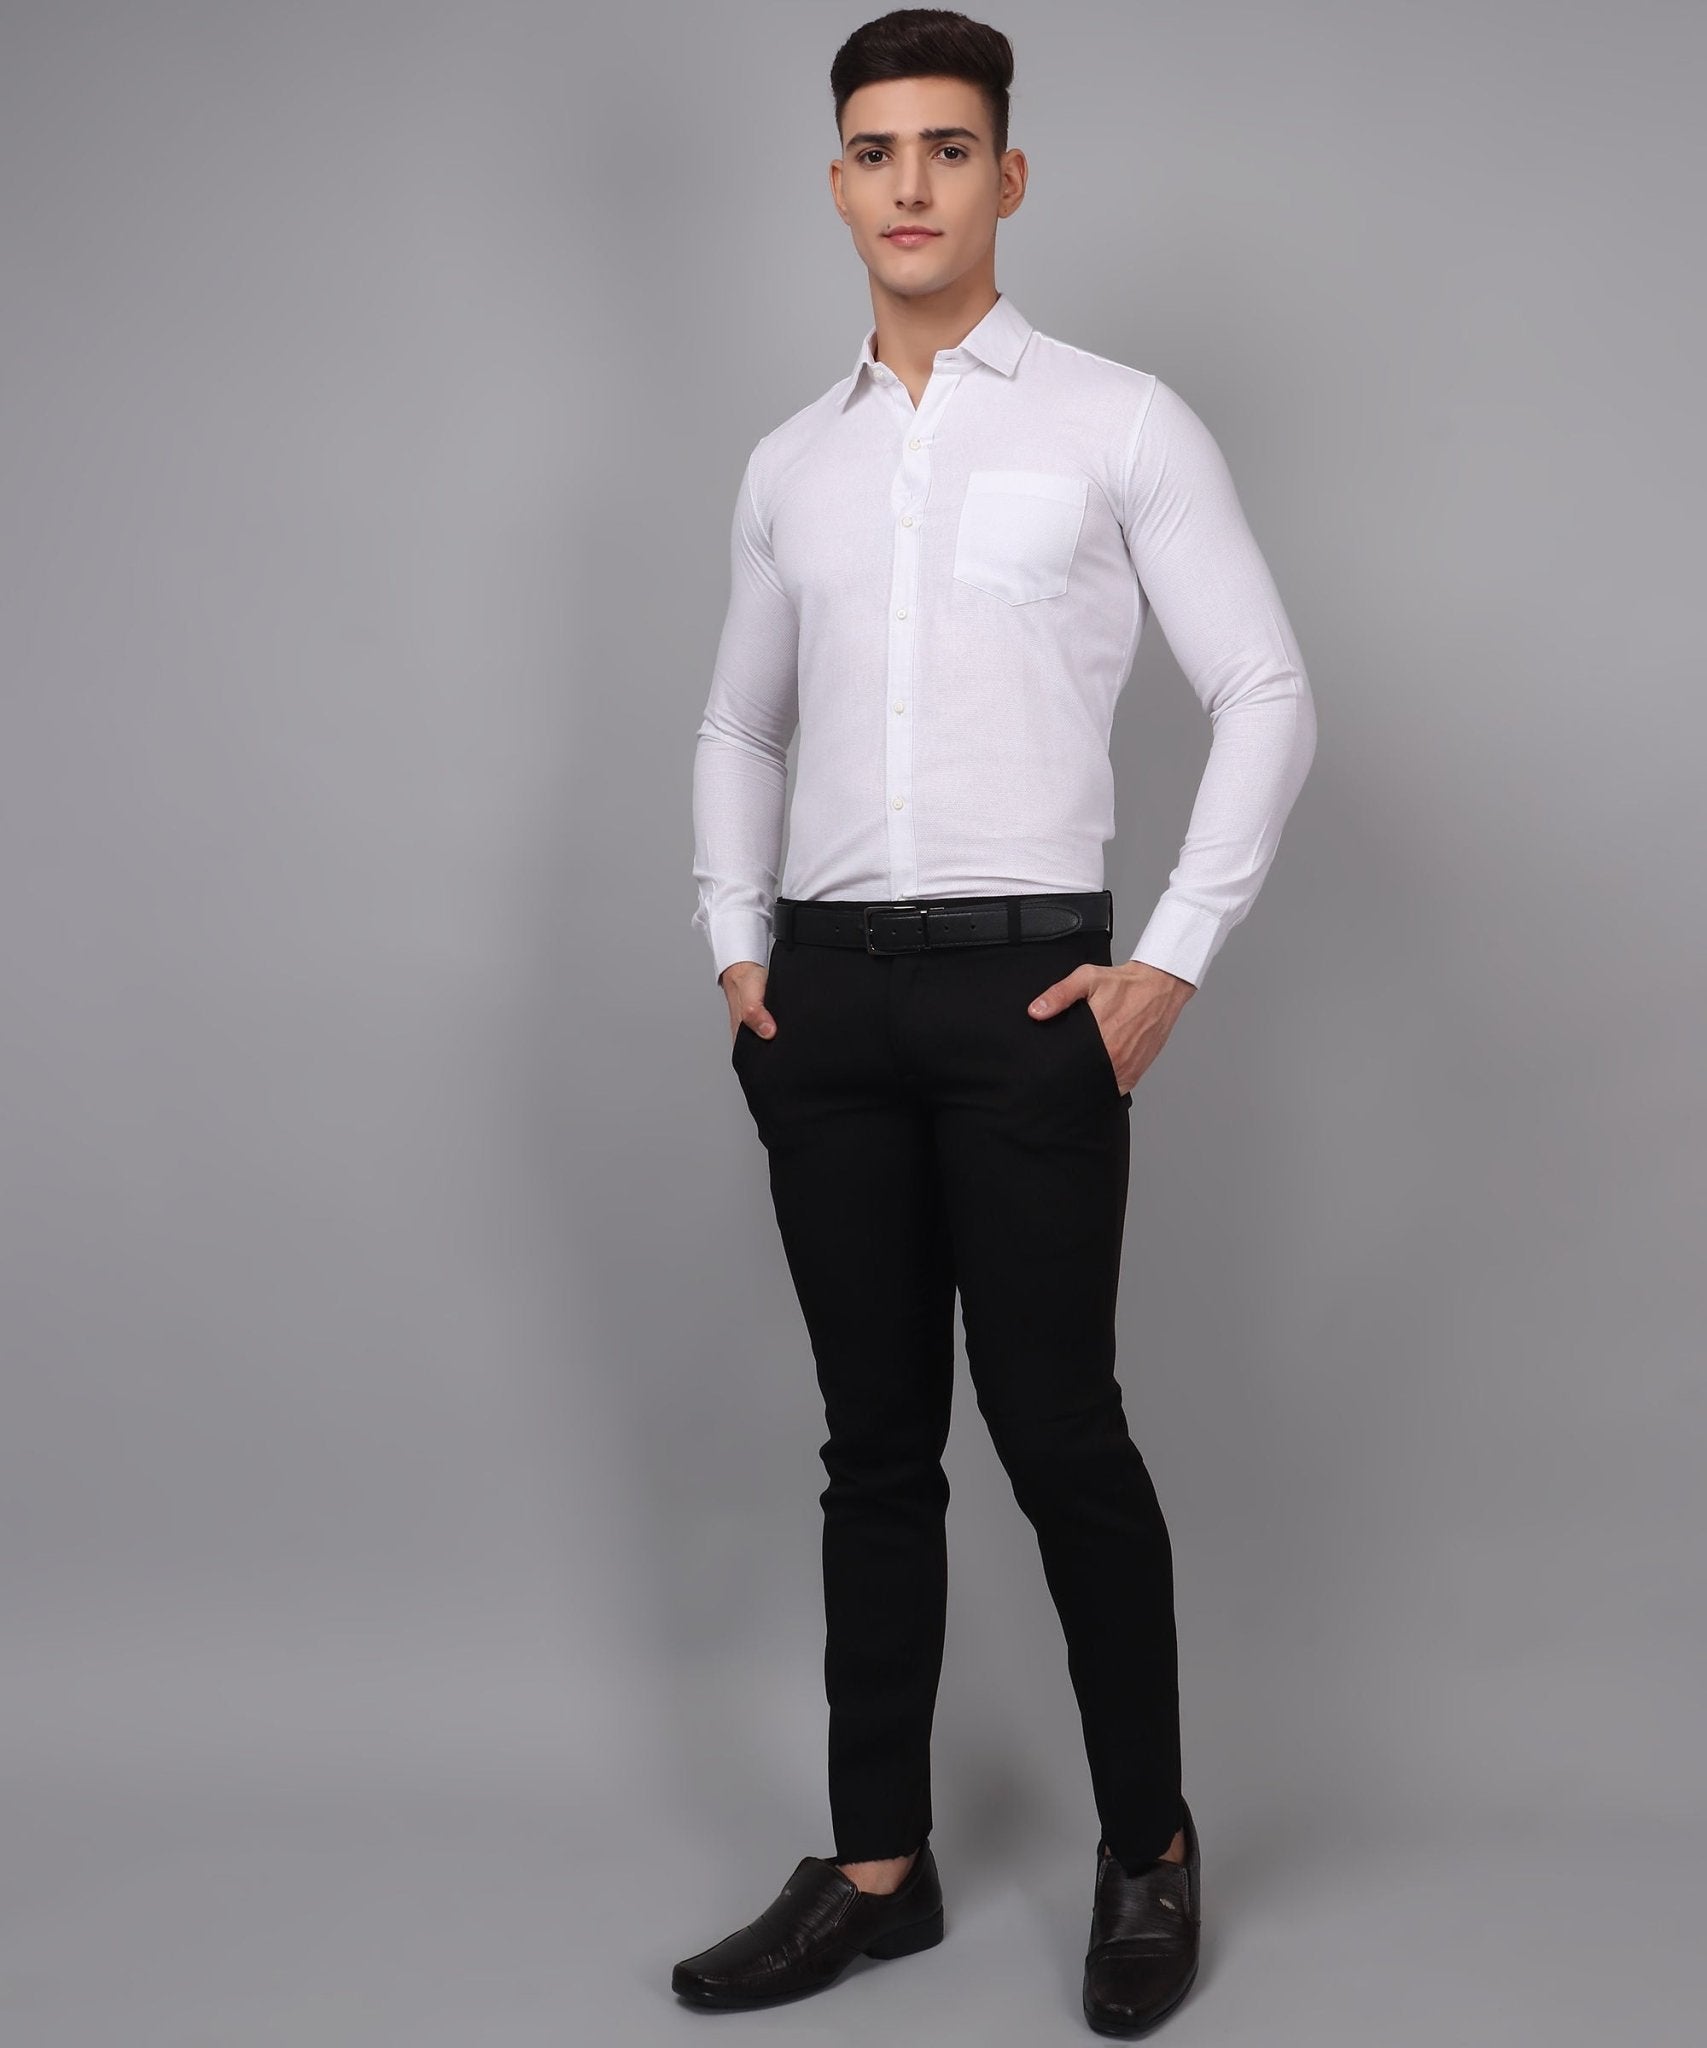 Luxe TryBuy Premium White Cotton Solid Casual/Formal Shirt For Men - TryBuy® USA🇺🇸